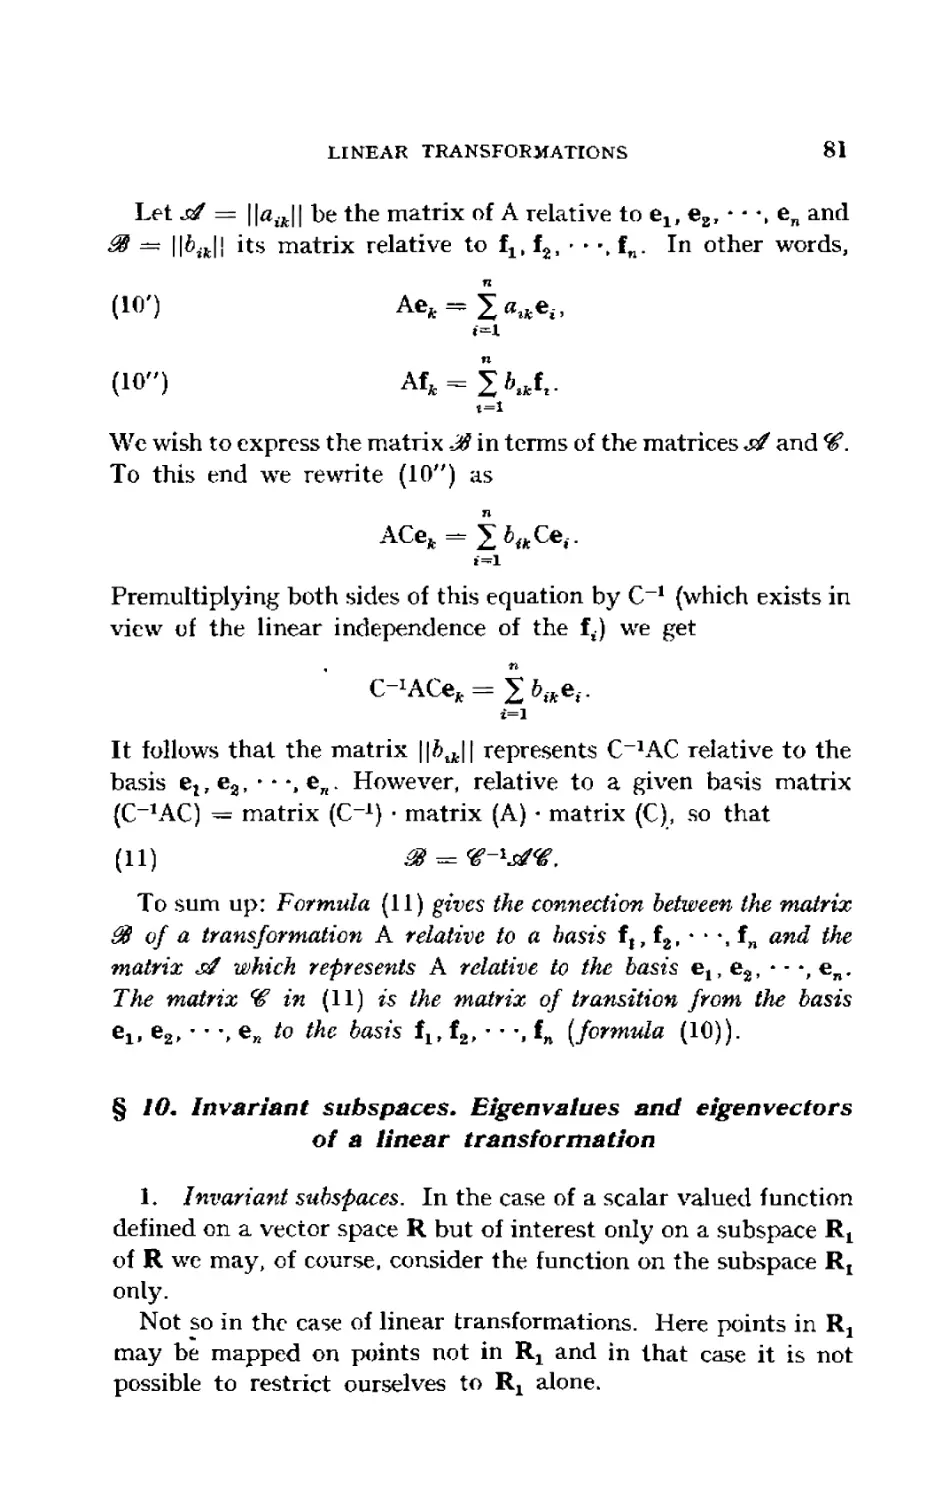 §10. Invariant subspaces. Eigenvalues and eigenvectors of a linear transformation